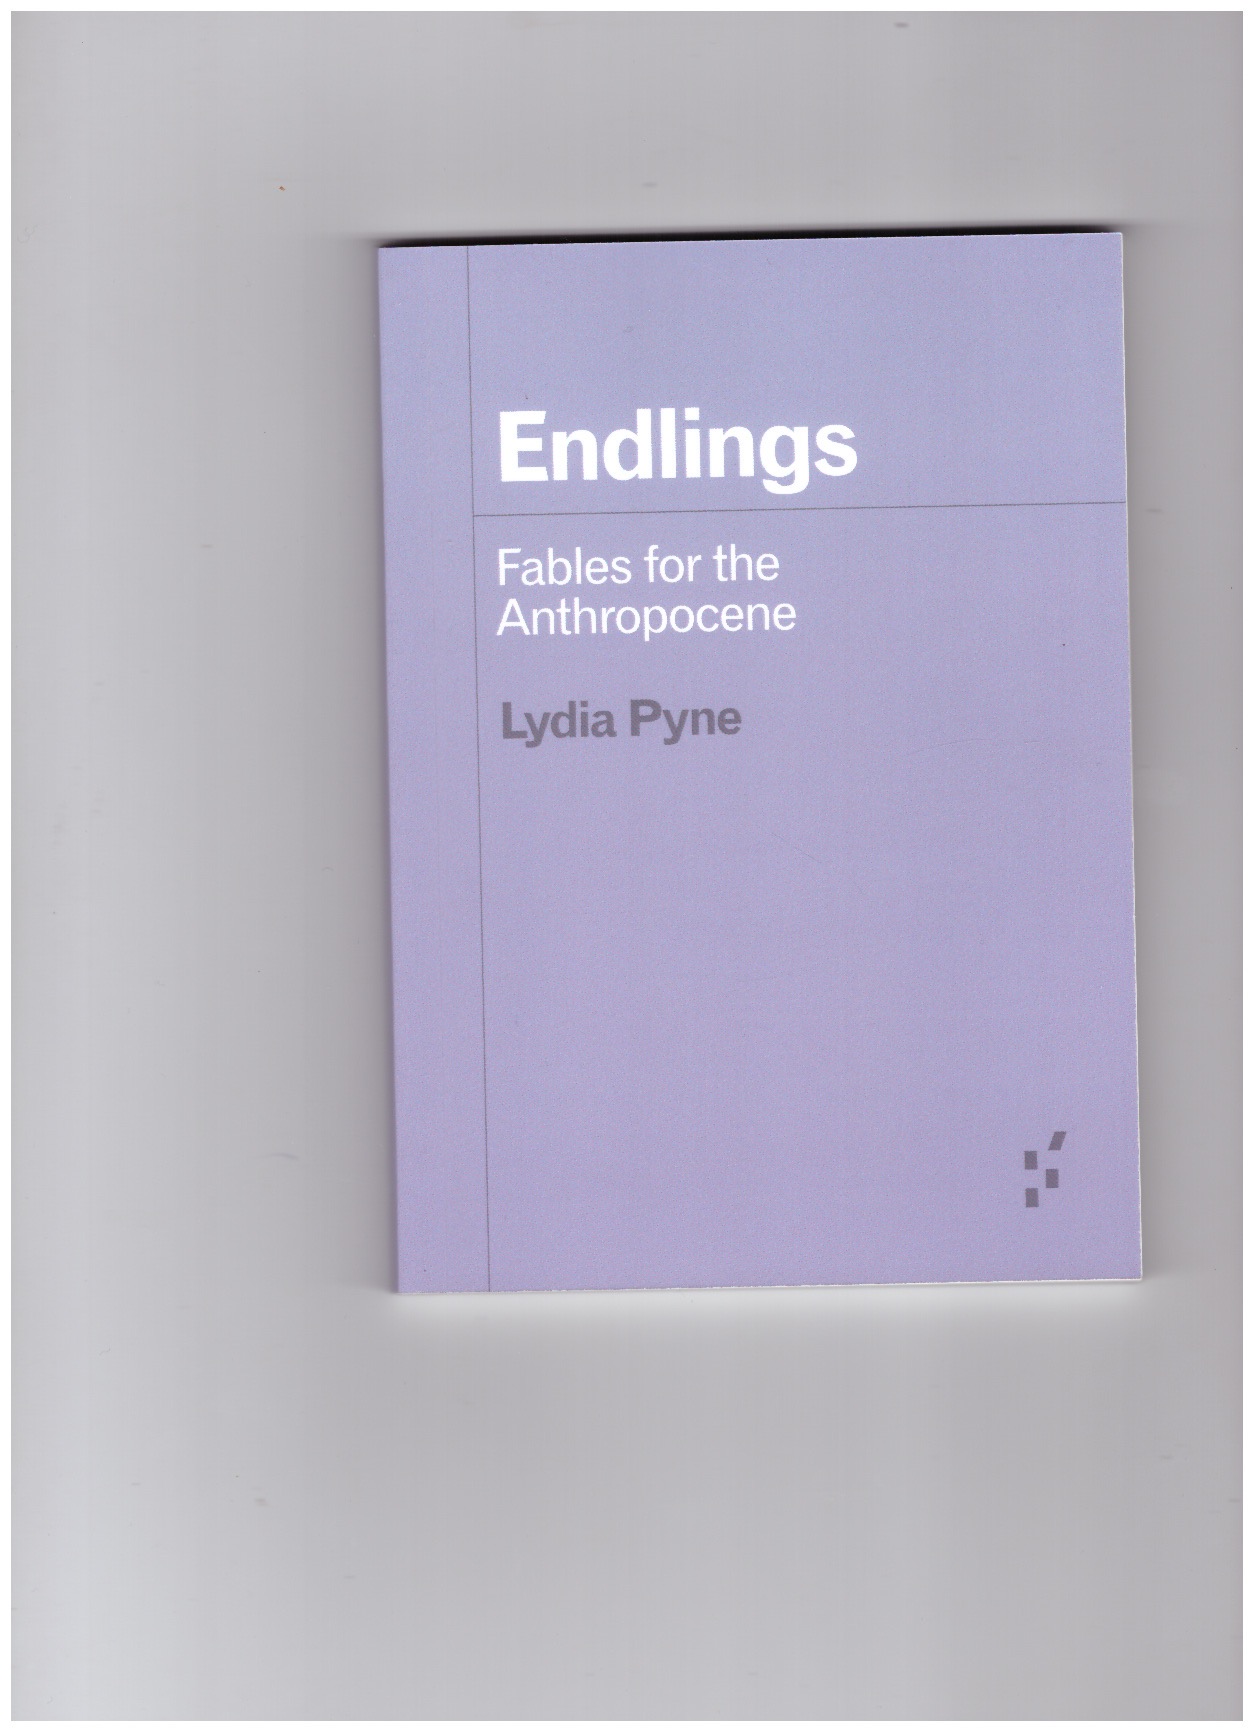 PYNE, Lydia - Endlings. Fables for the Anthropocene